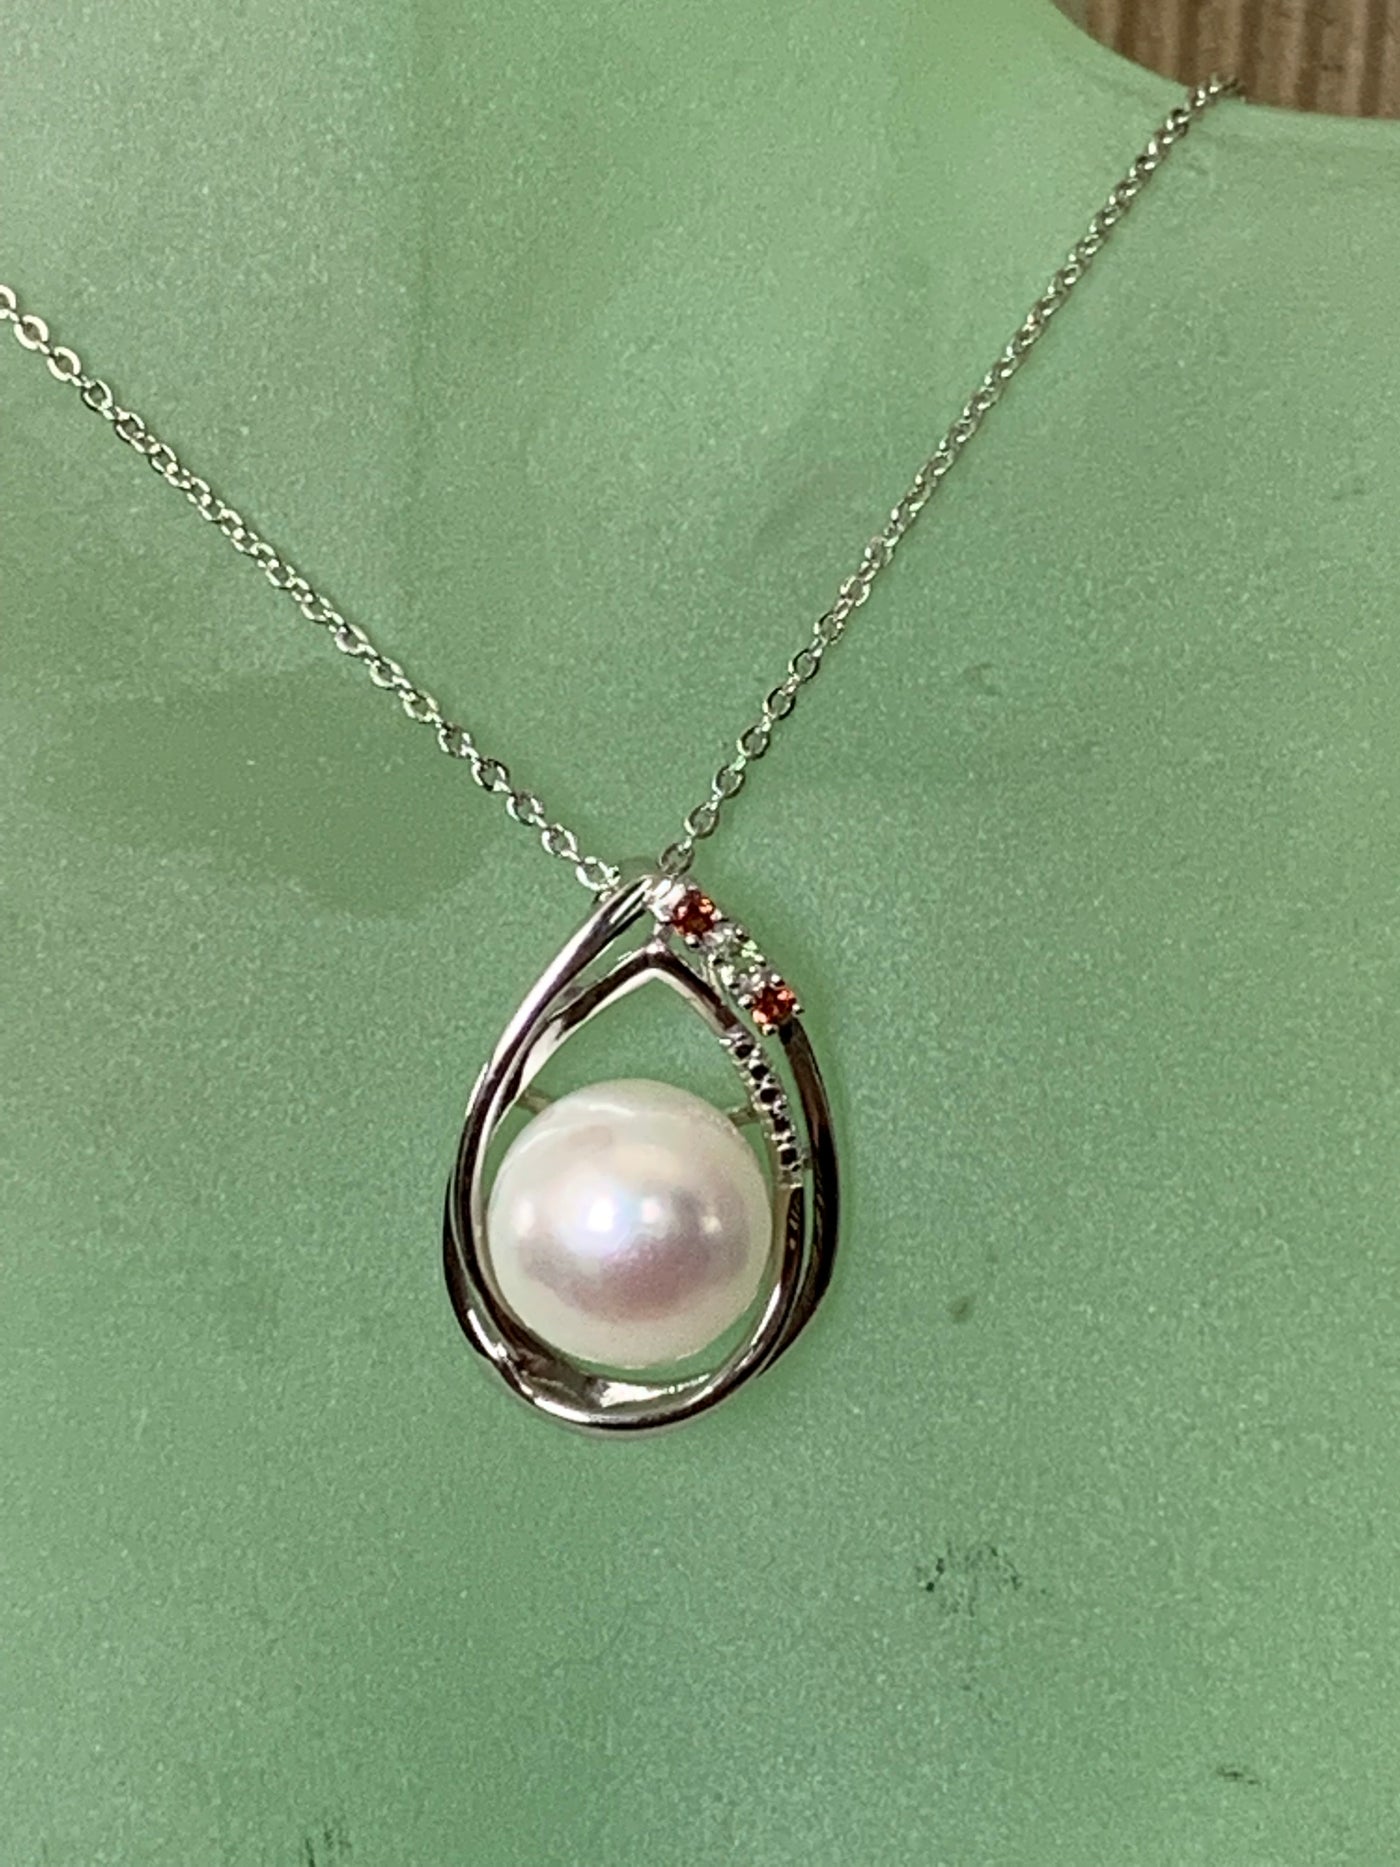 12mm Genuine Round Pearl with Garnet Peridot Accent Pendant in Silver